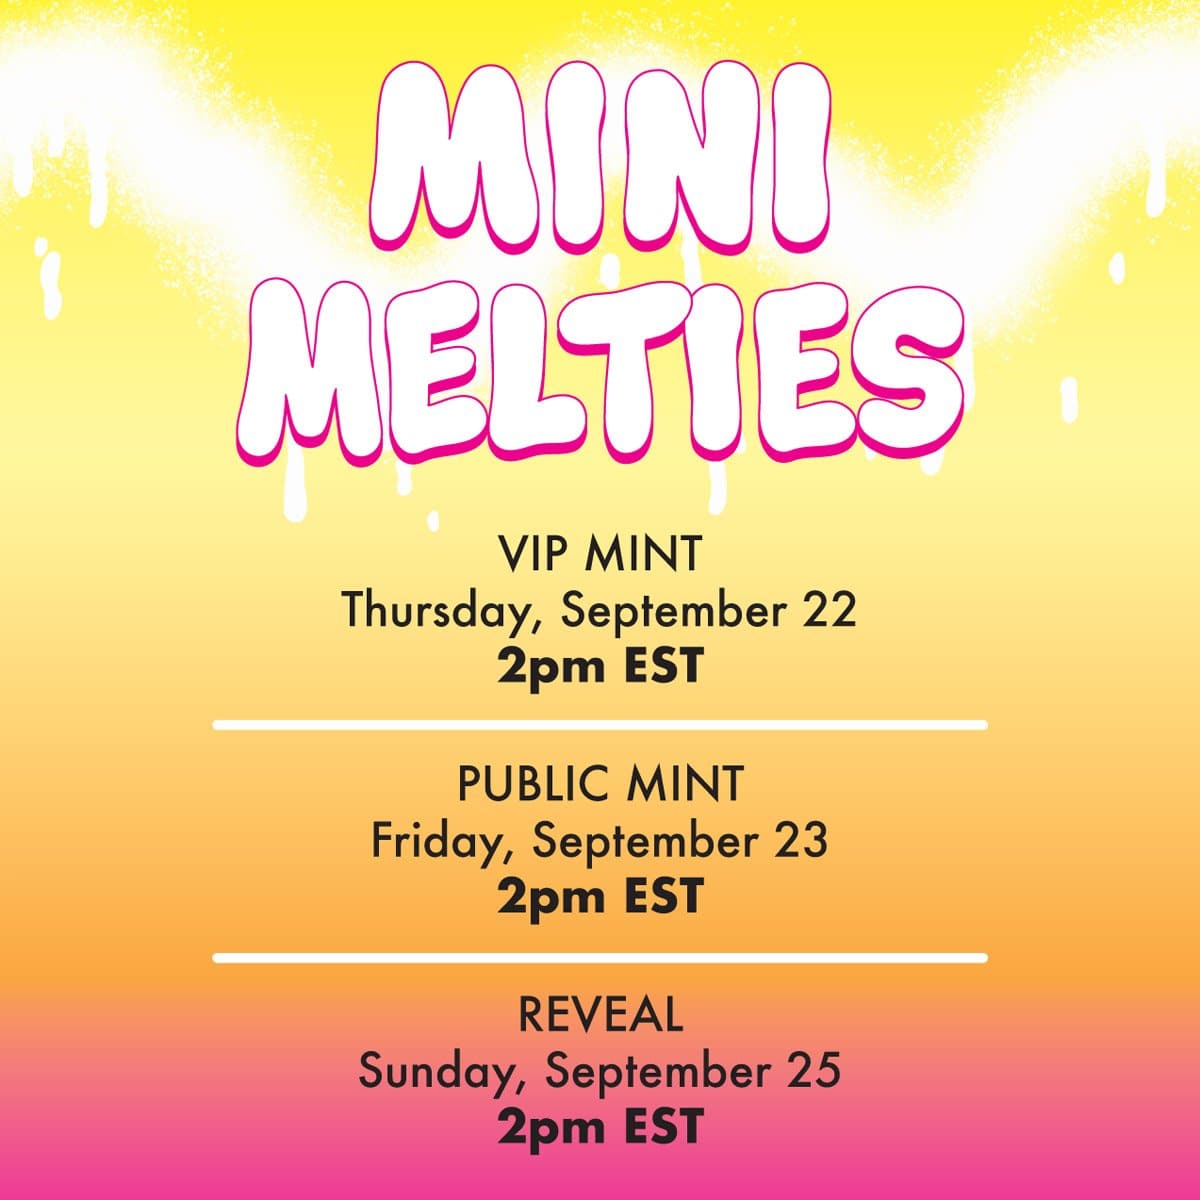 image of upcoming NFT mint poster for Mini Melties